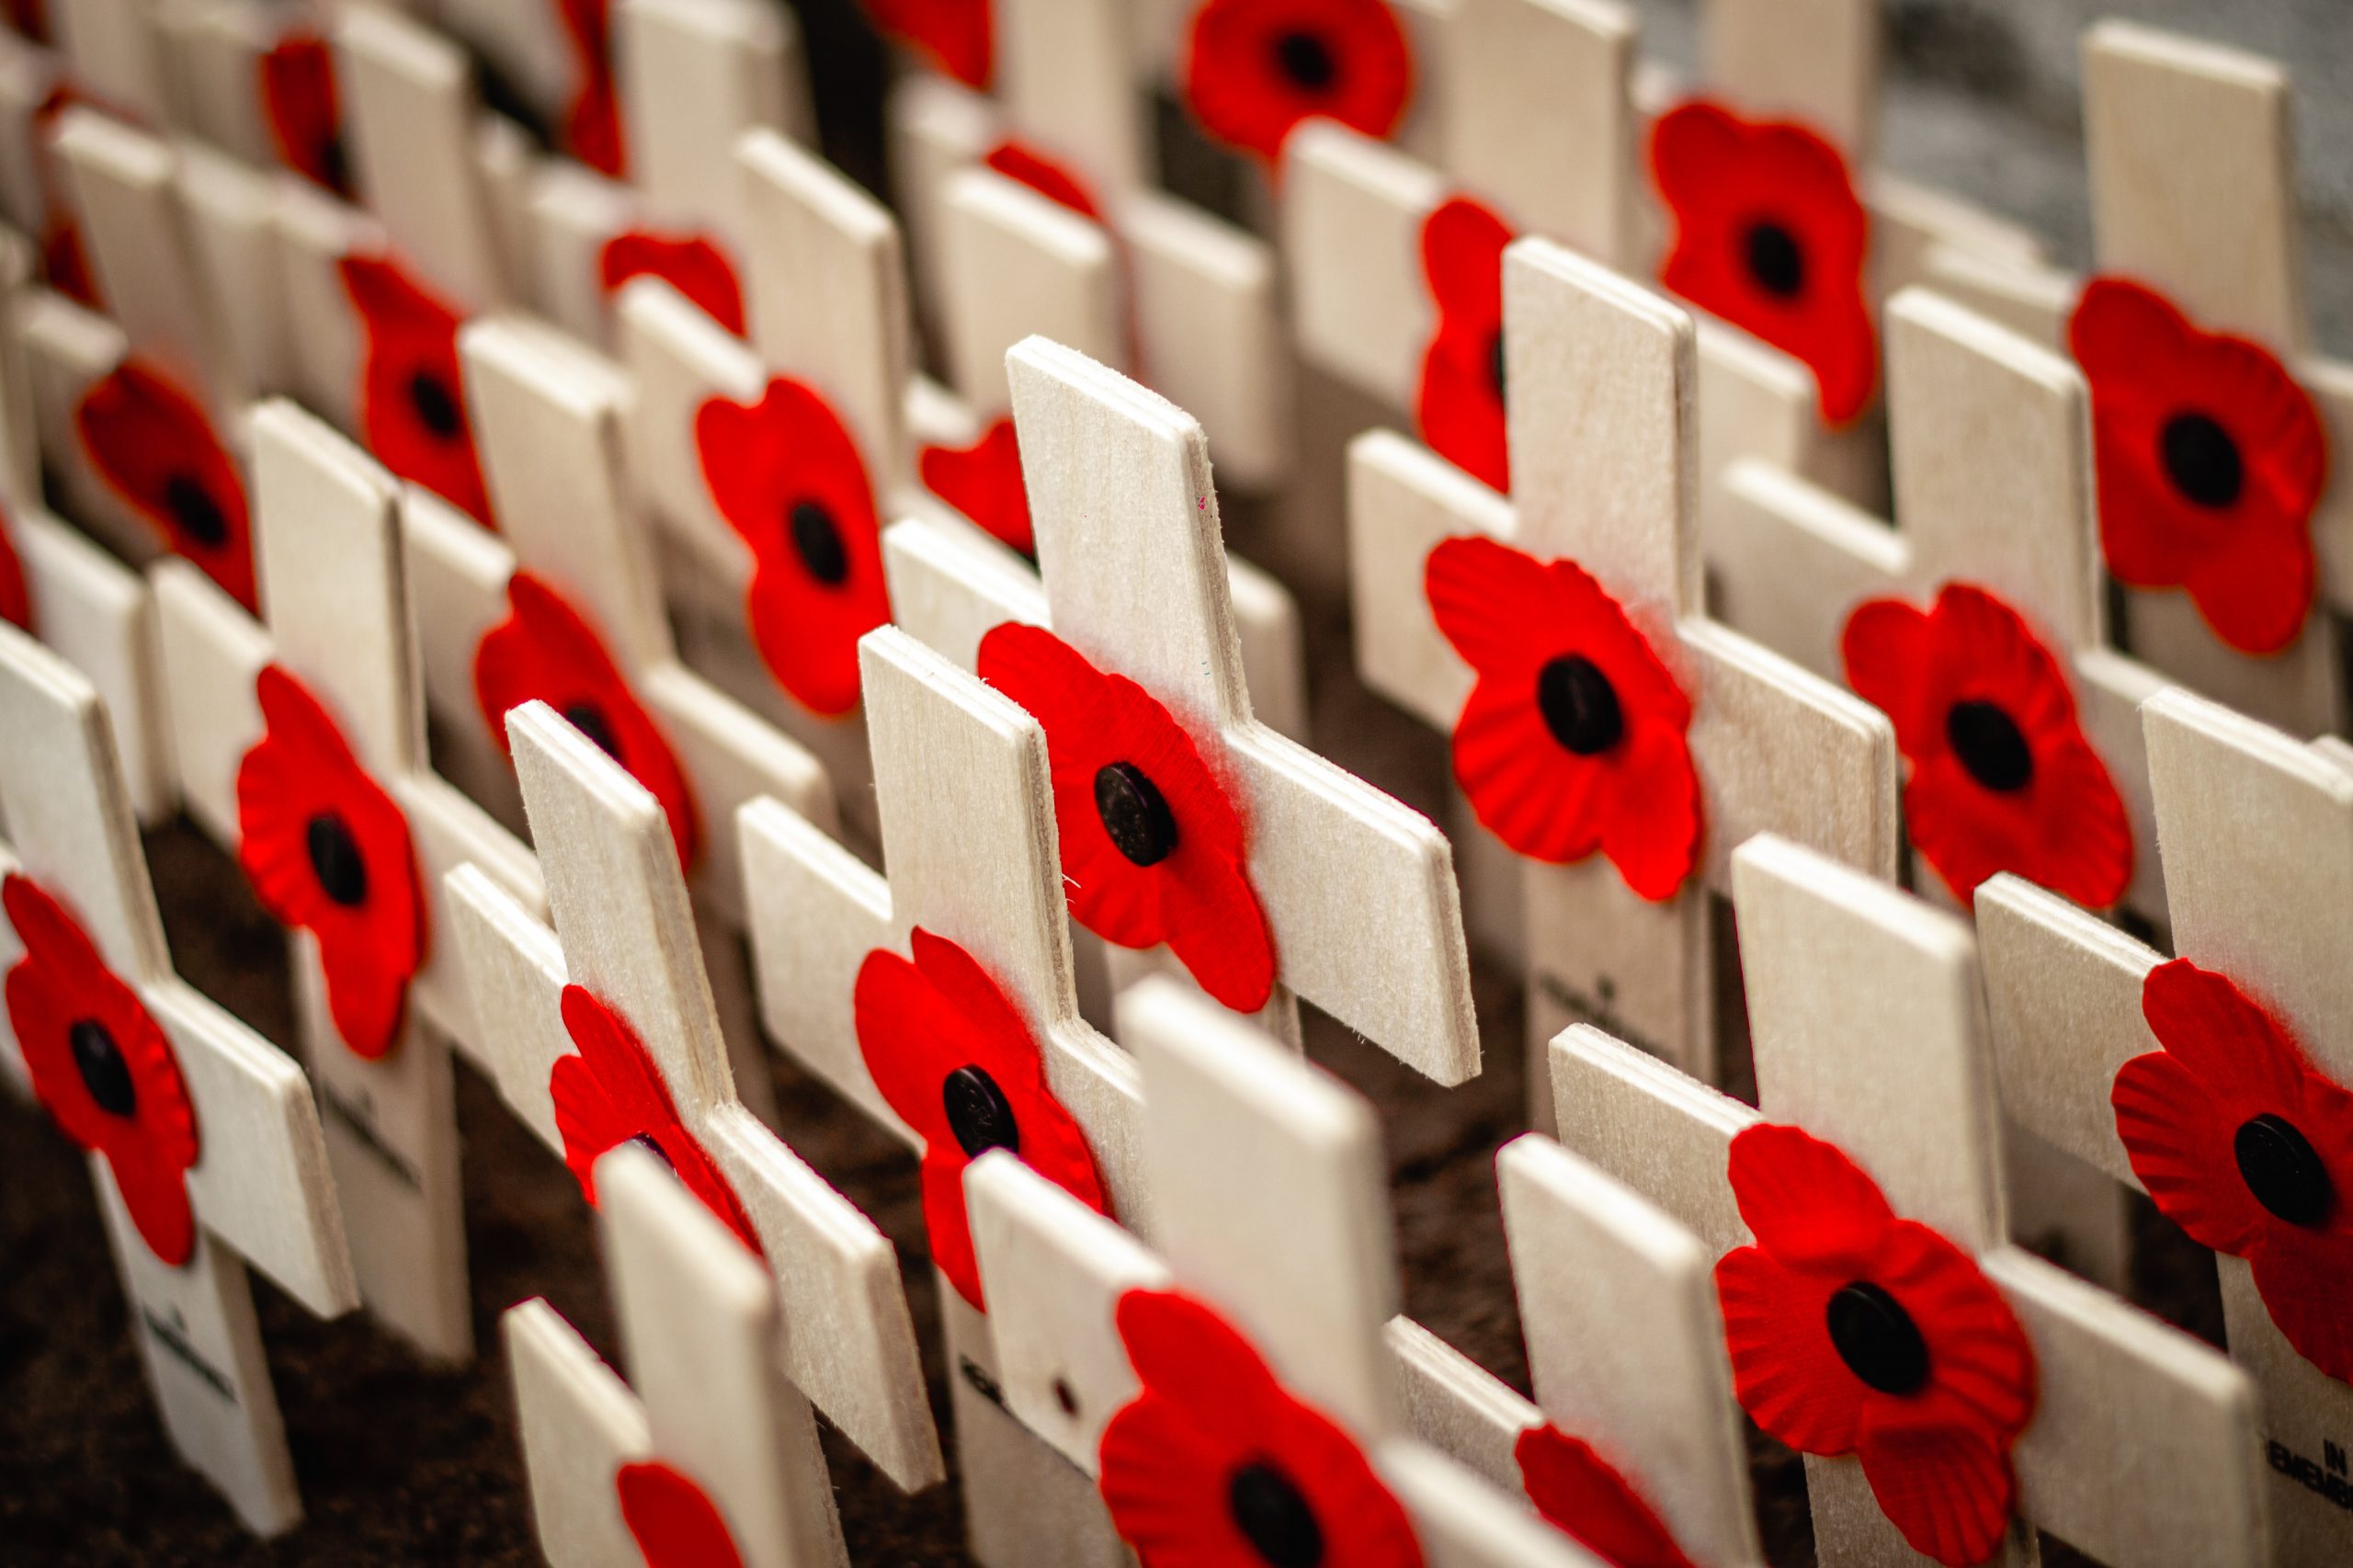 Crosses with poppies on for Remembrance Day